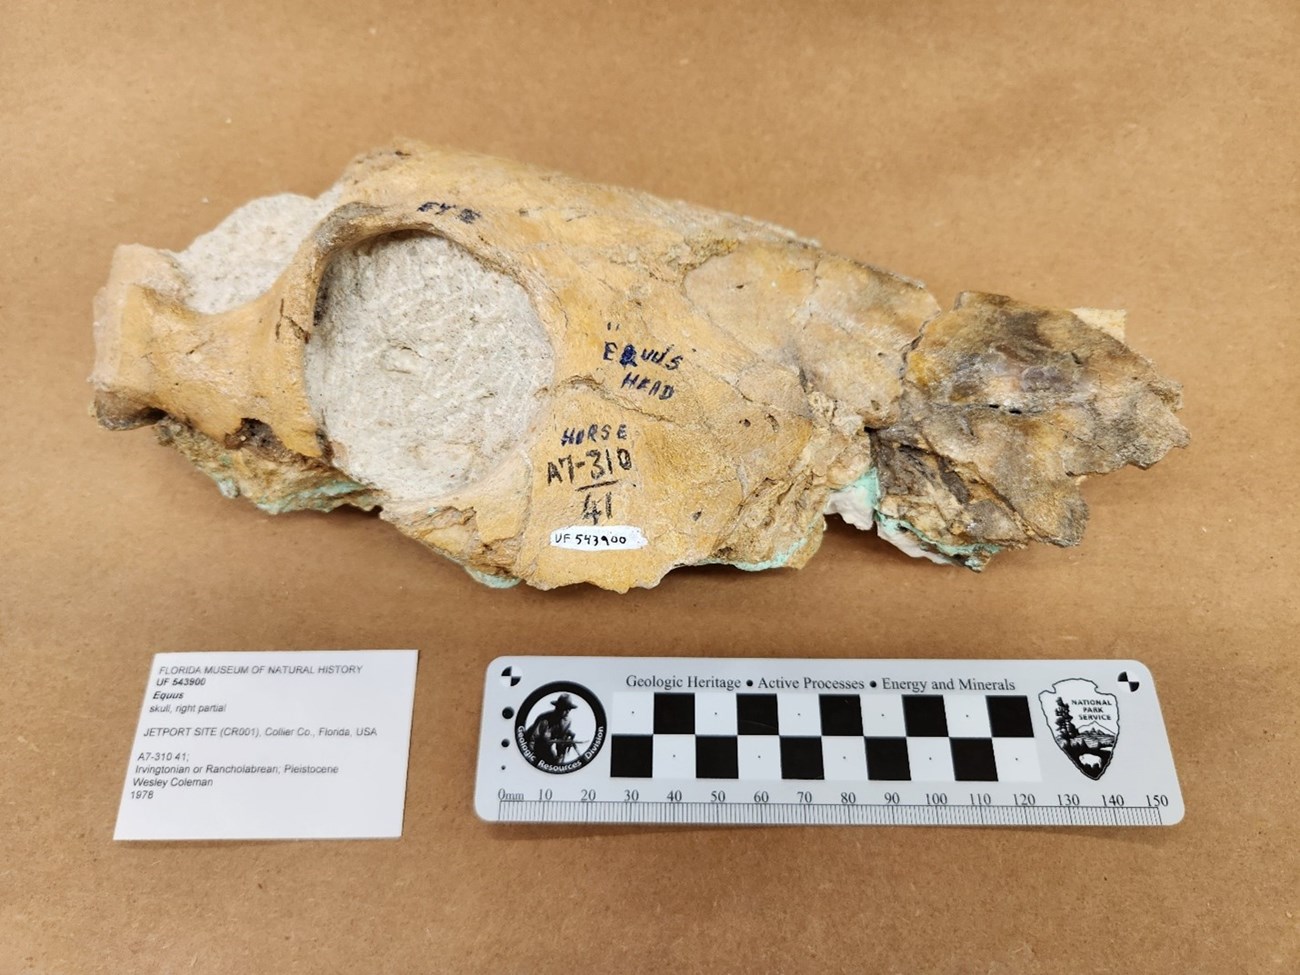 Photo of a fossil skull with a ruler for scale.